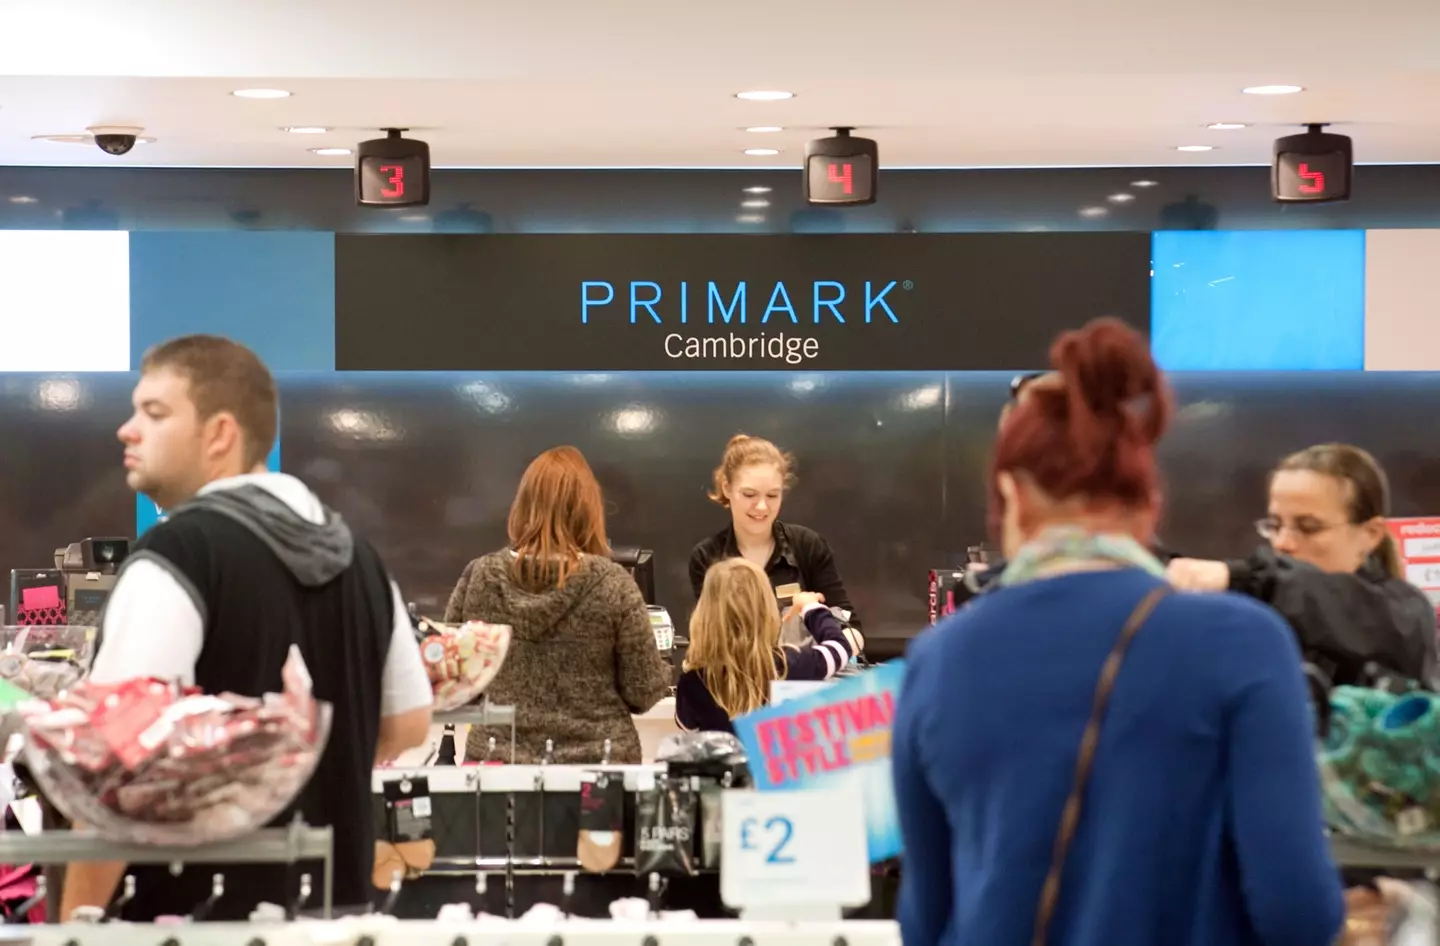 Primark will soon have a Click & Collect option in select stores.